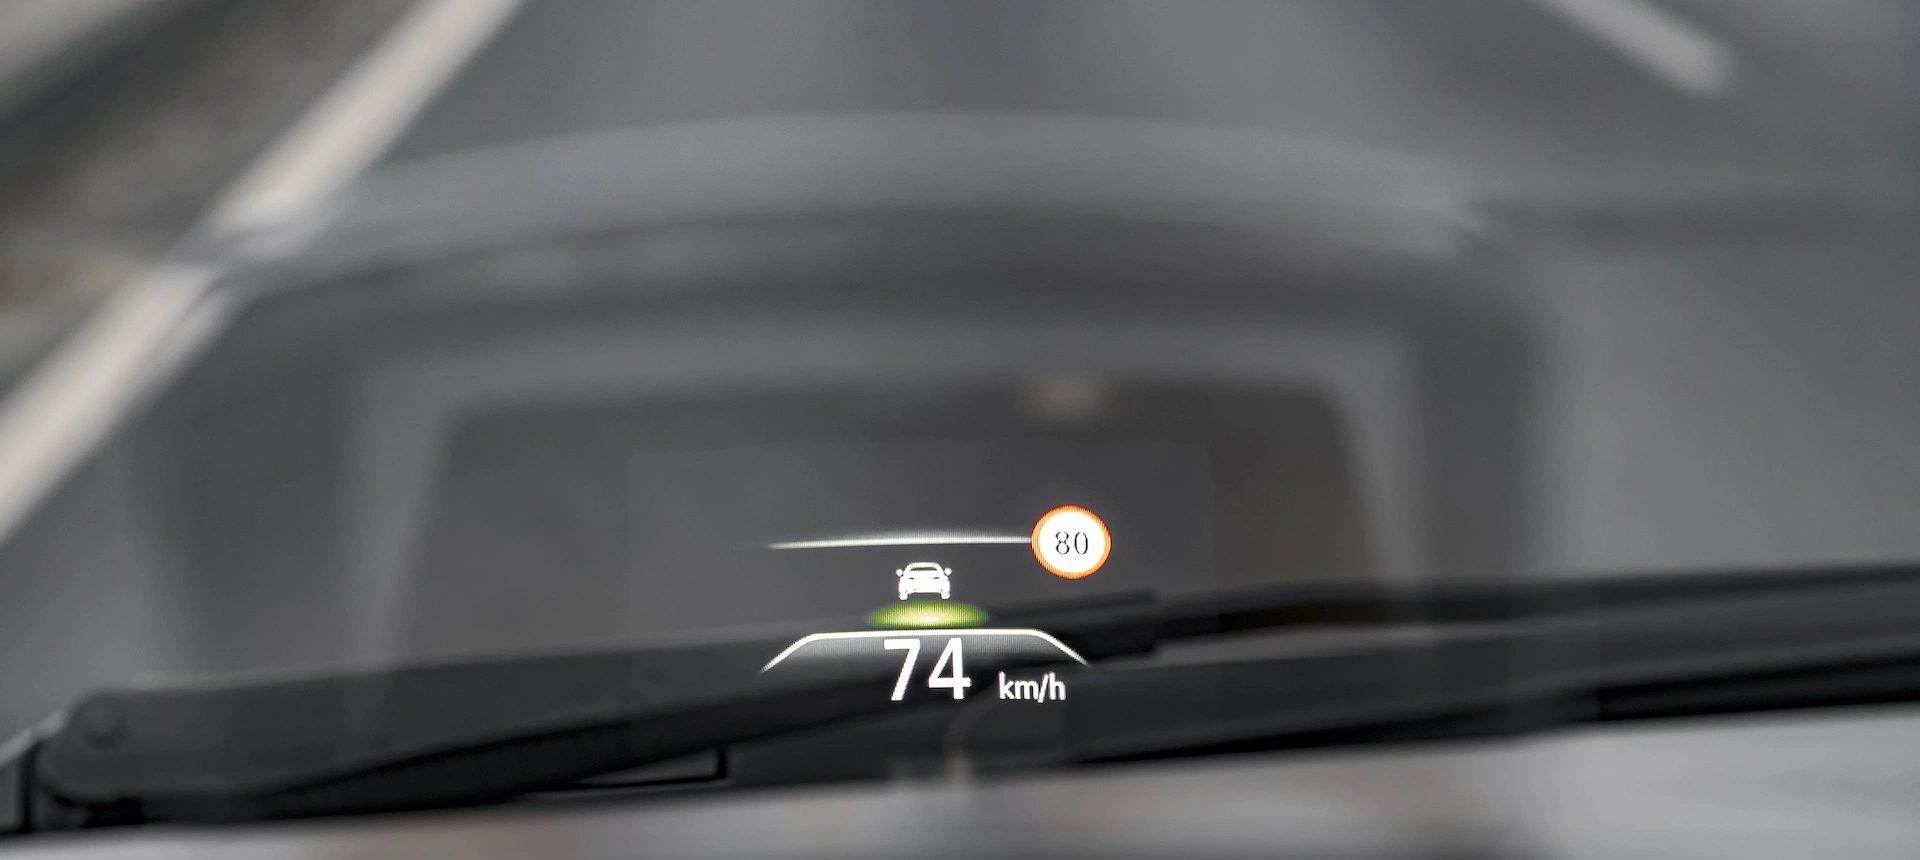 A head-up display device that reflects driving info at the driver's eye level.